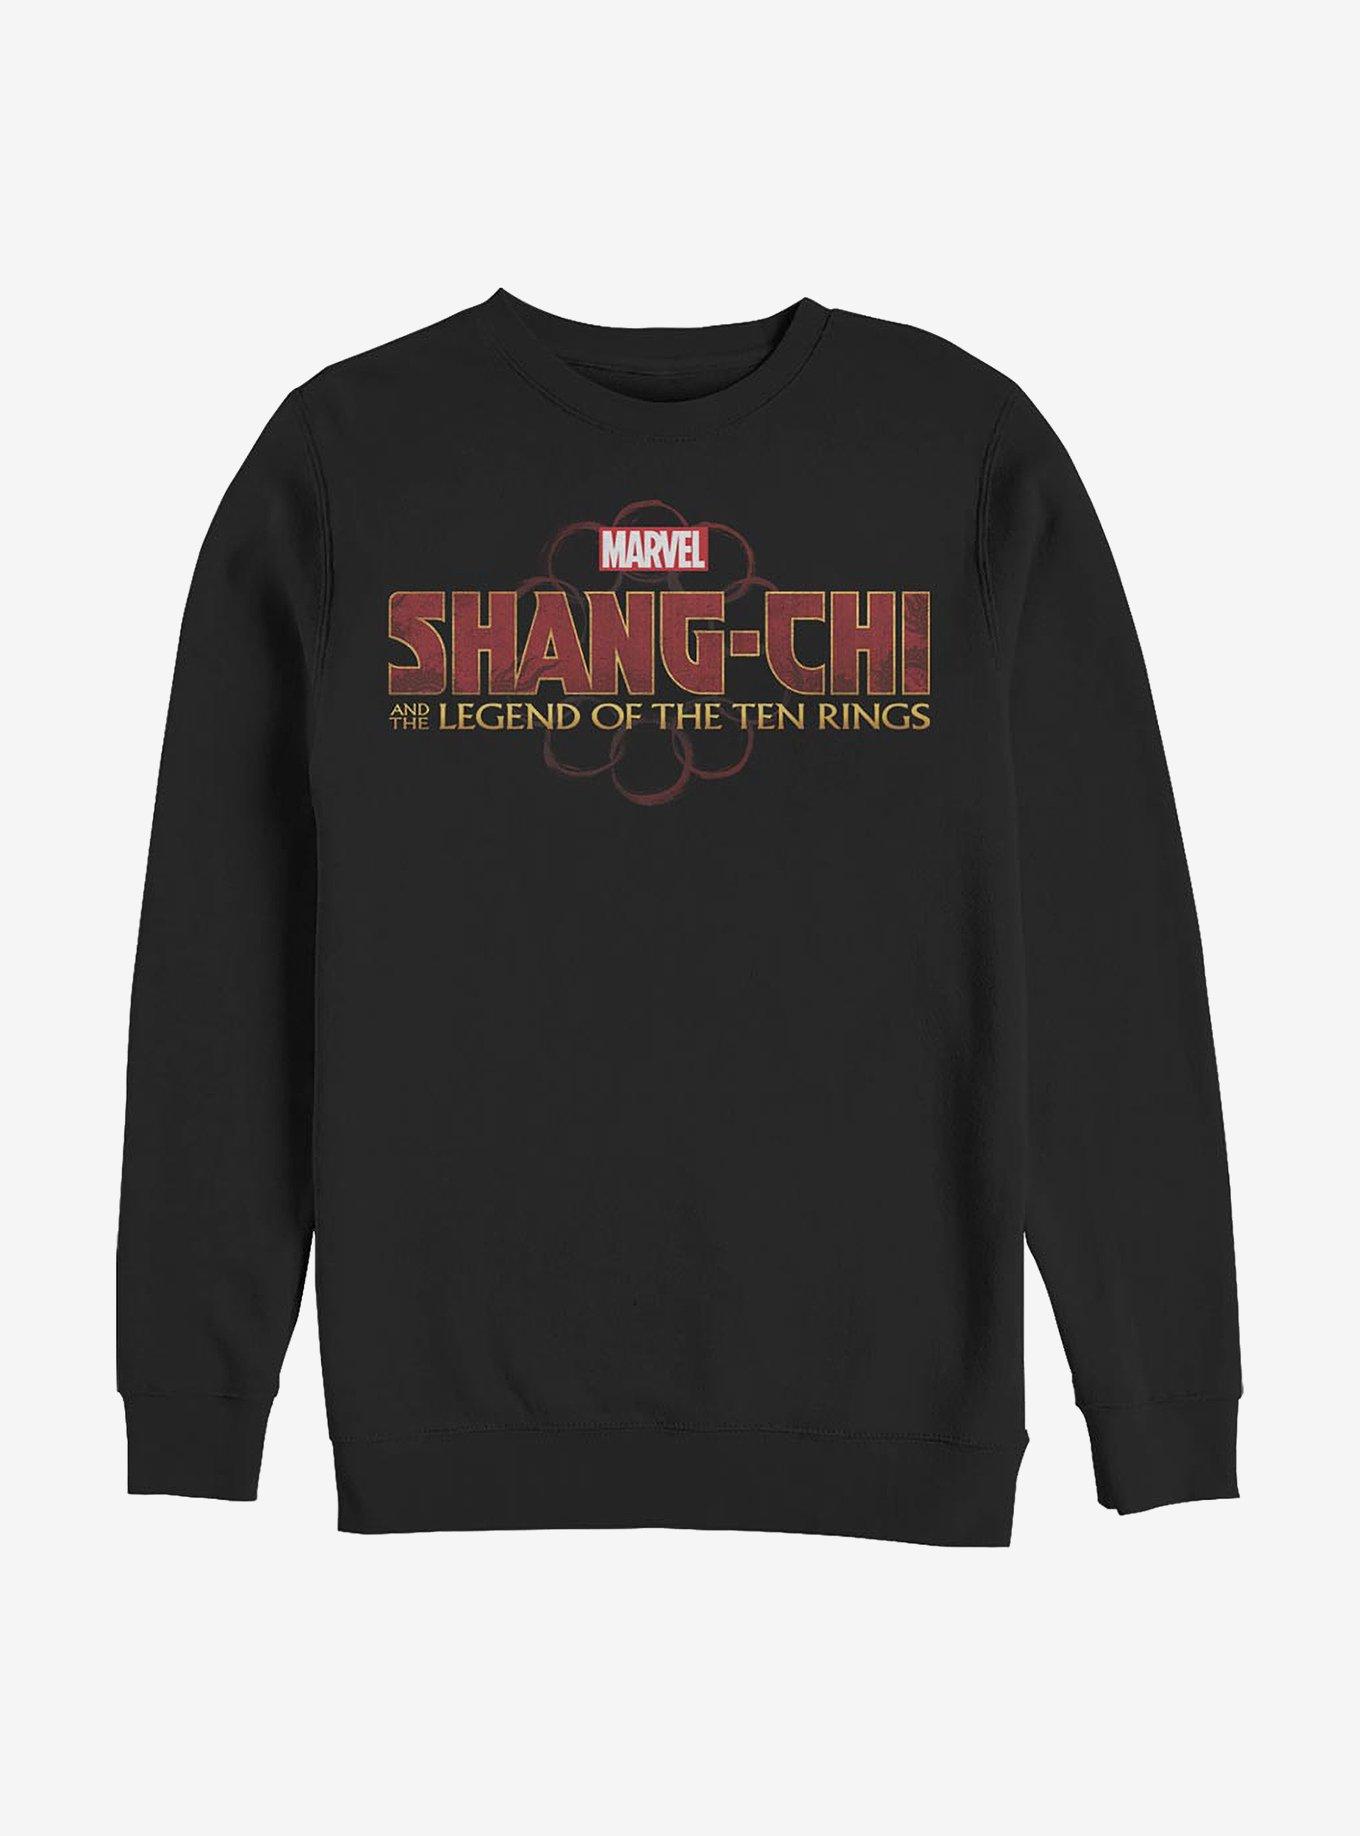 Marvel Shang-Chi And The Legend Of The Ten Rings Title Crew Sweatshirt, BLACK, hi-res